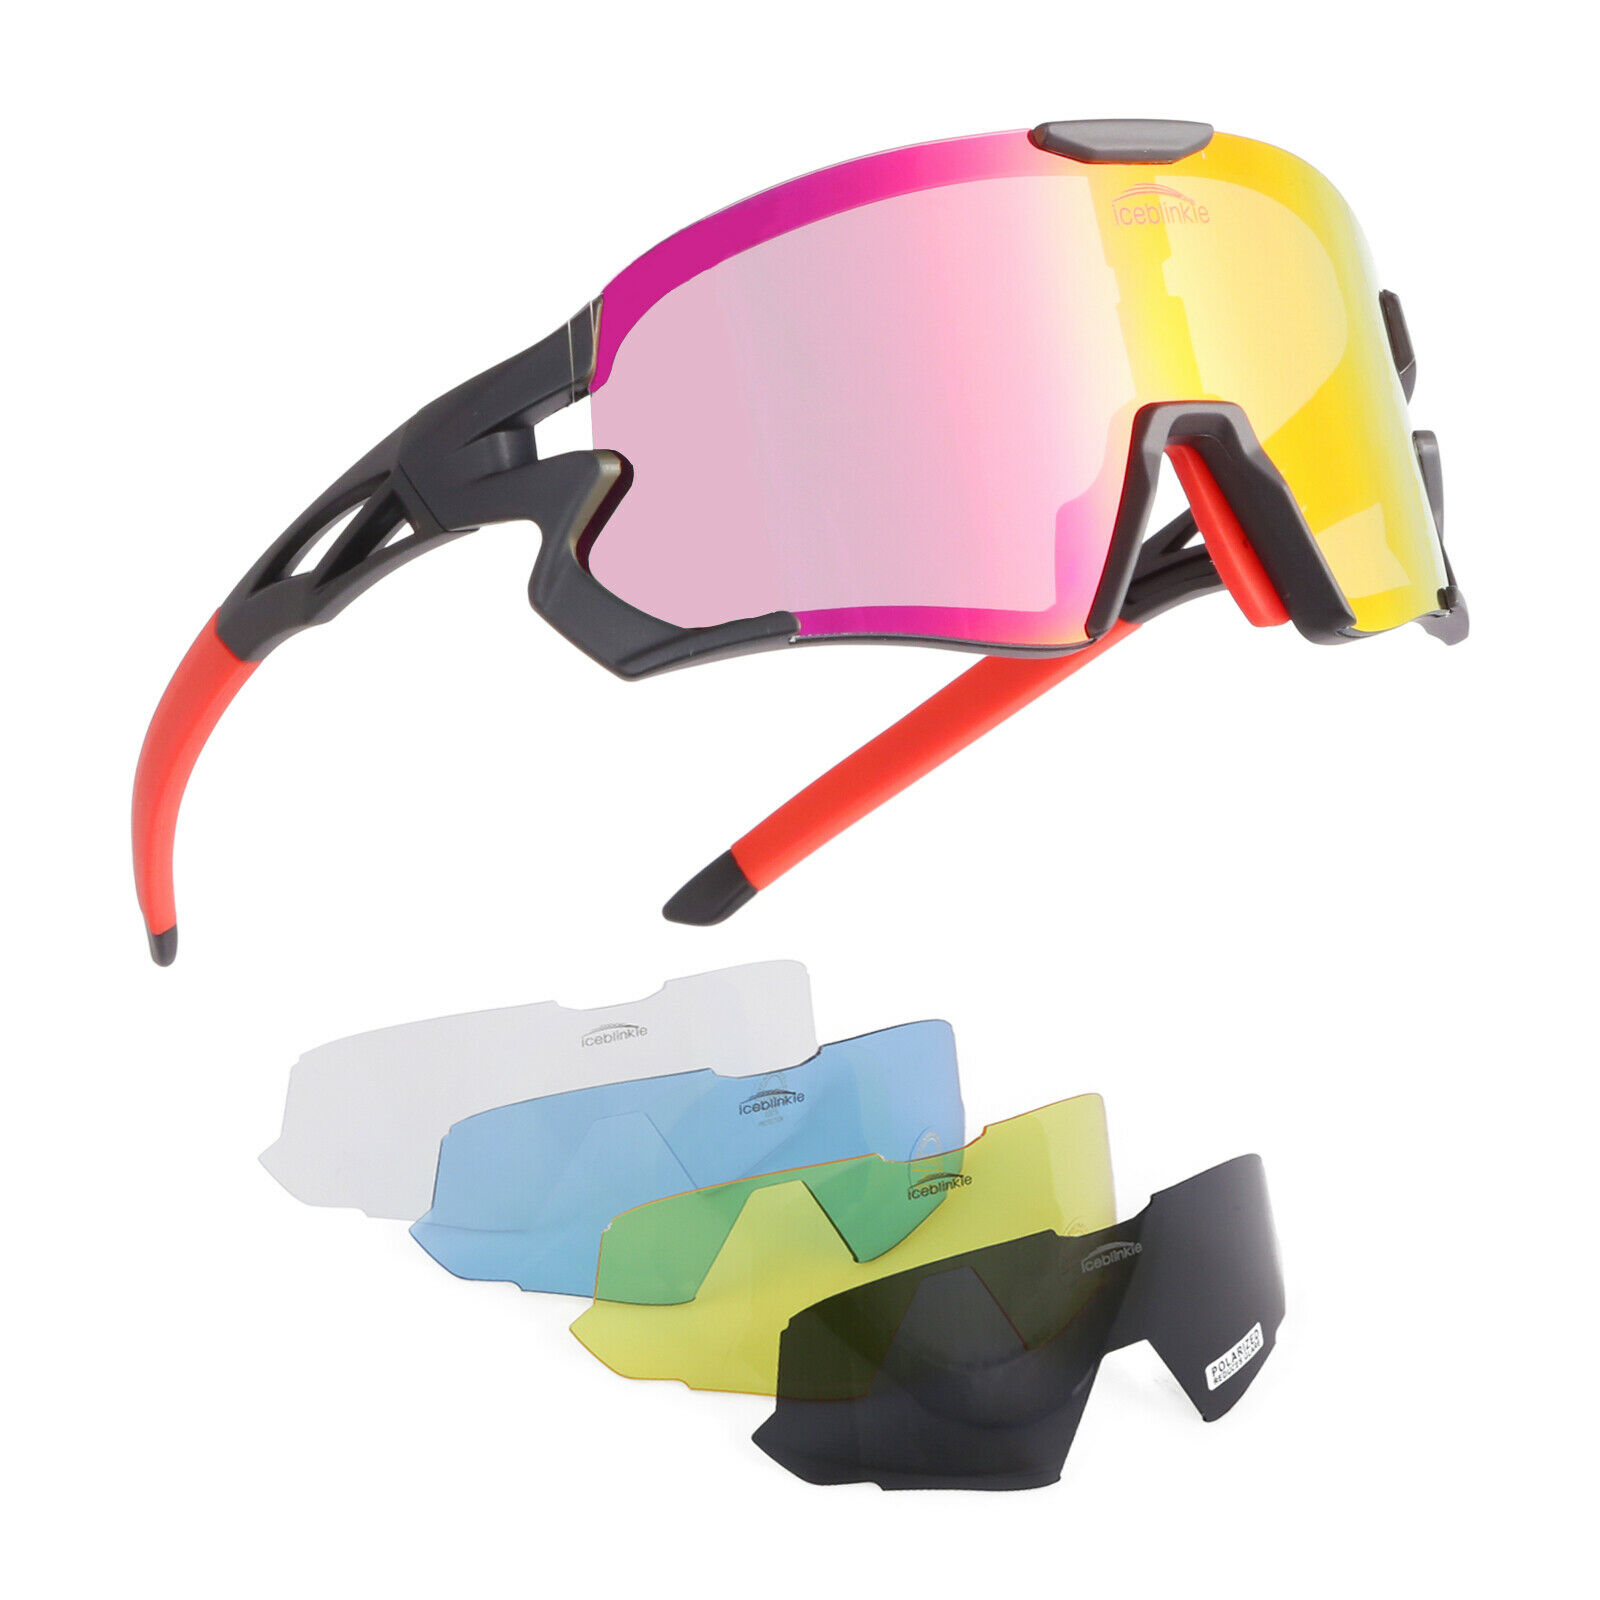 Polarized Cycling Sunglasses With 5 Interchangeable Lens Sports Riding Glasses